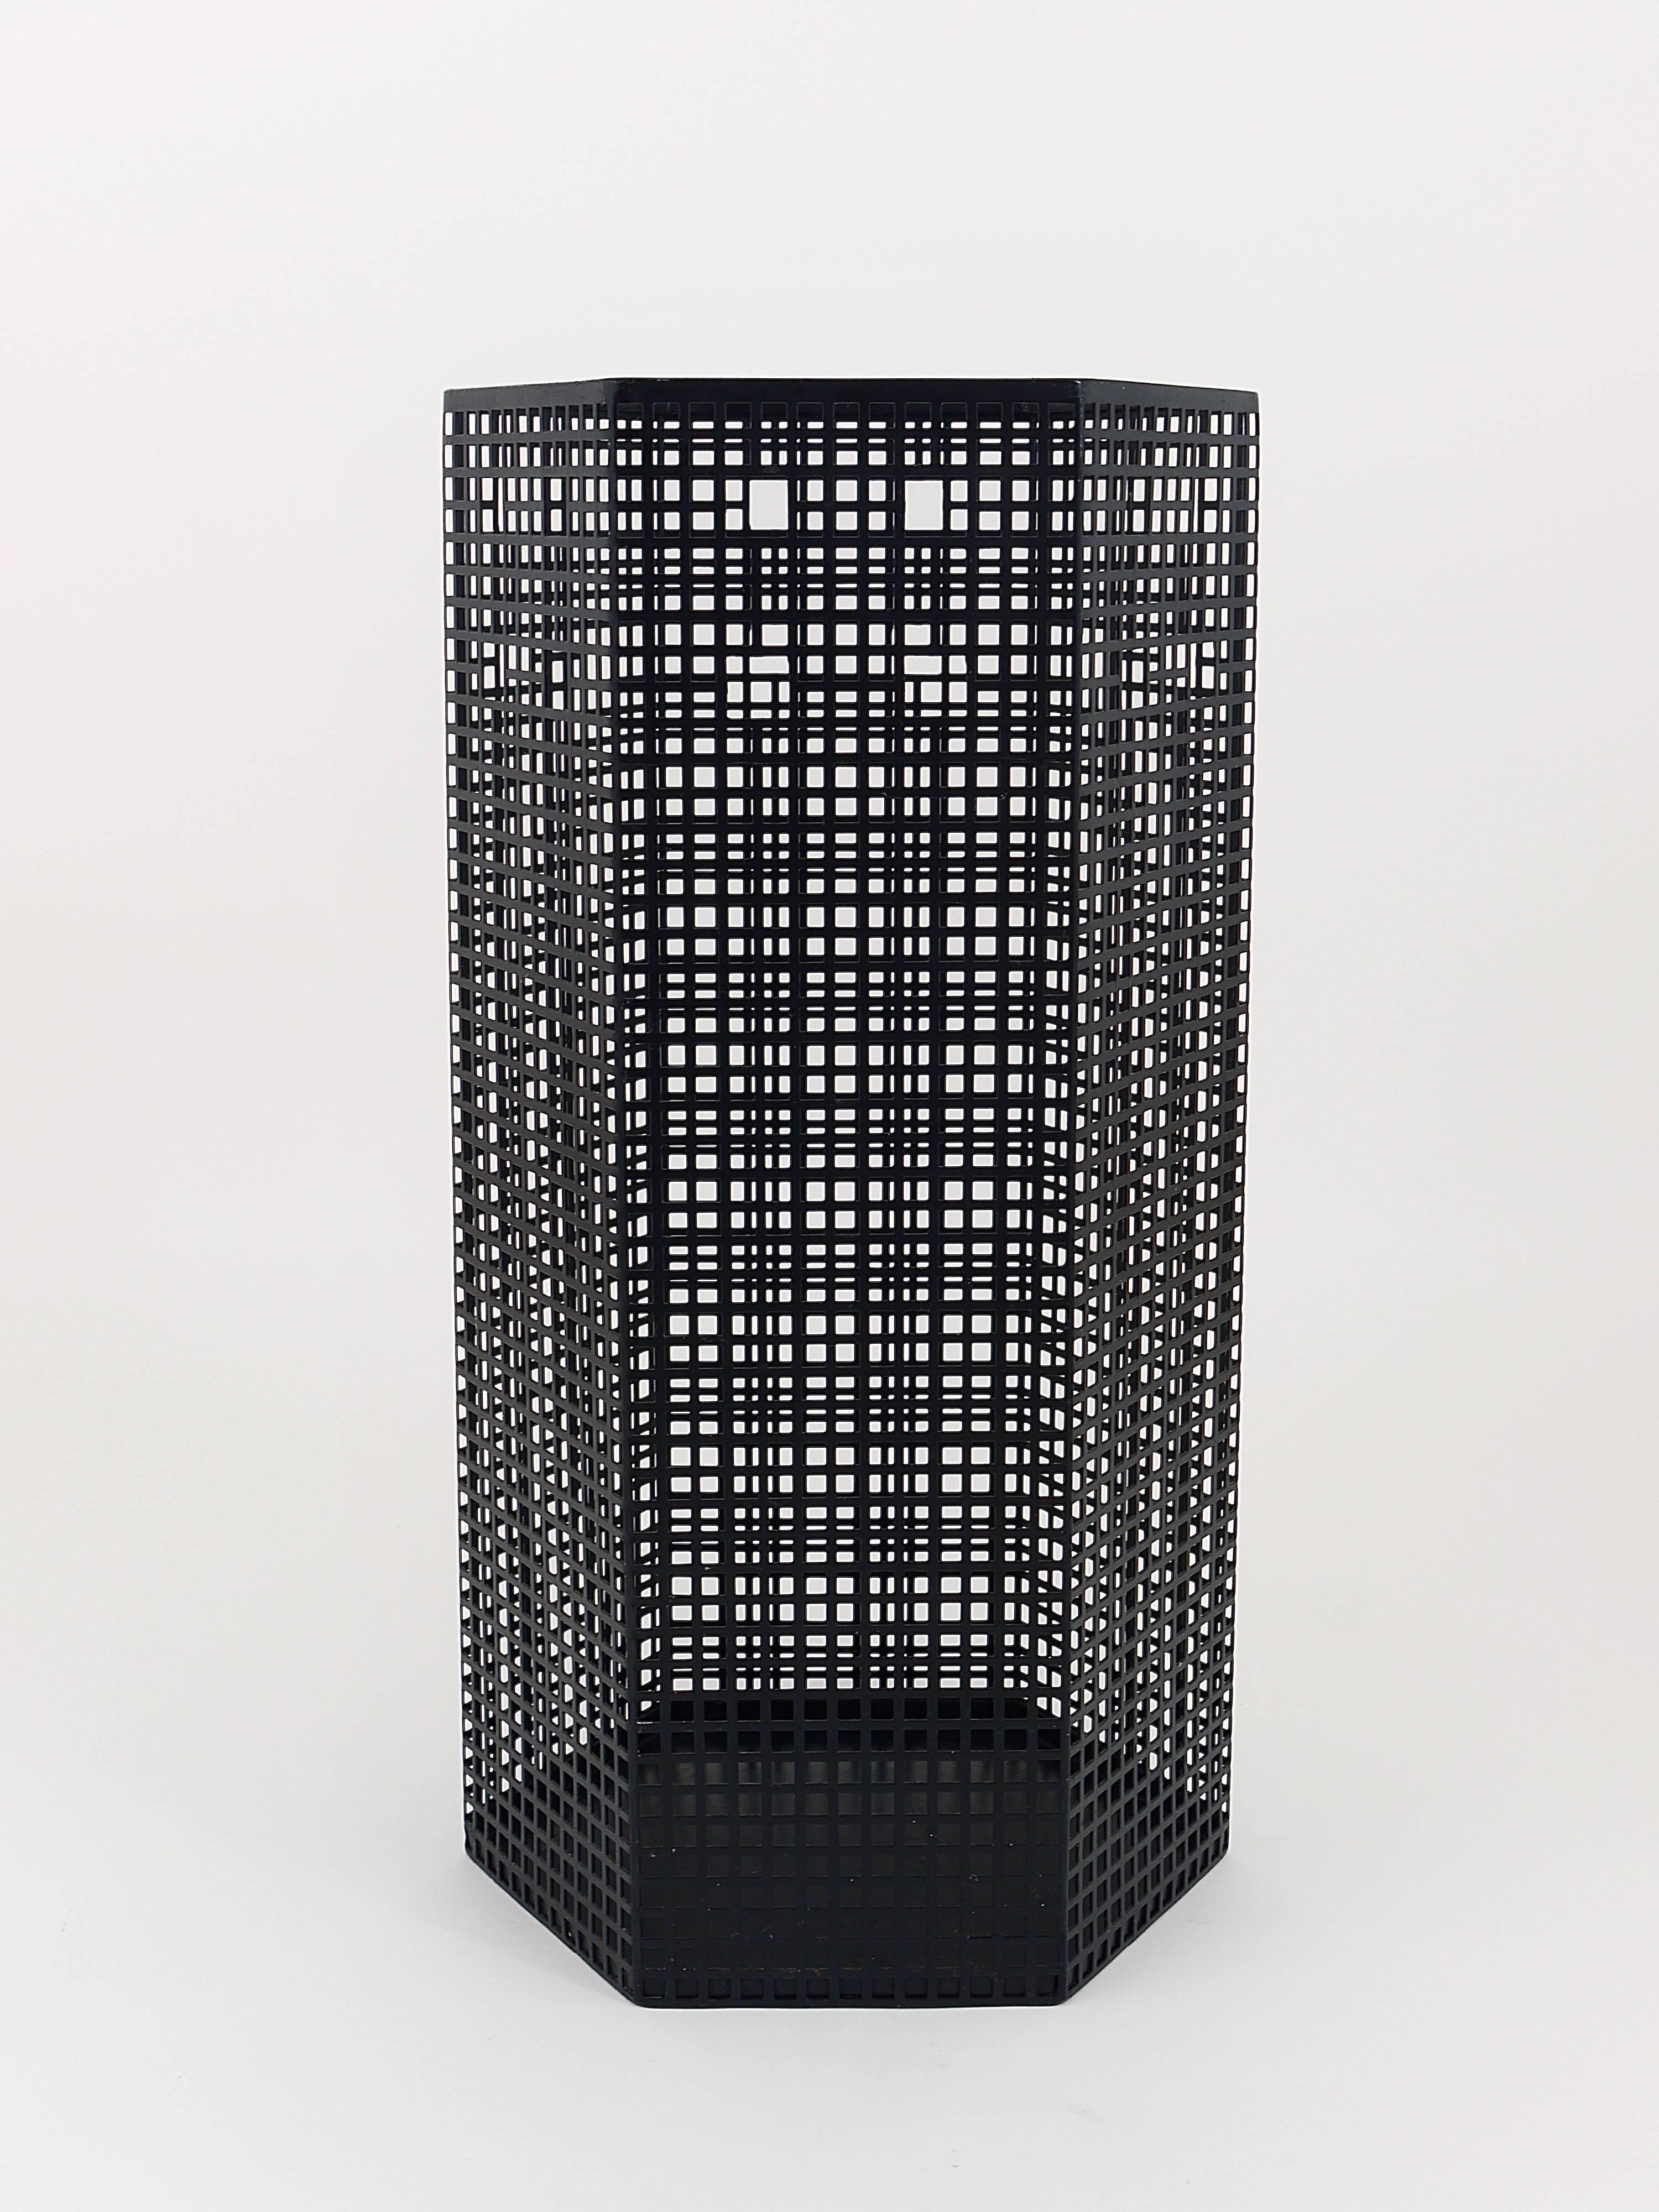 A beautiful umbrella stand or waste-paper, designed by Josef Hoffmann in 1905, manufactured as a Wiener Werkstatte Re-edition in the 1980s by Bieffeplast, Padua/Italy. Made of black enameled perforated metal. In excellent condition. Label on its